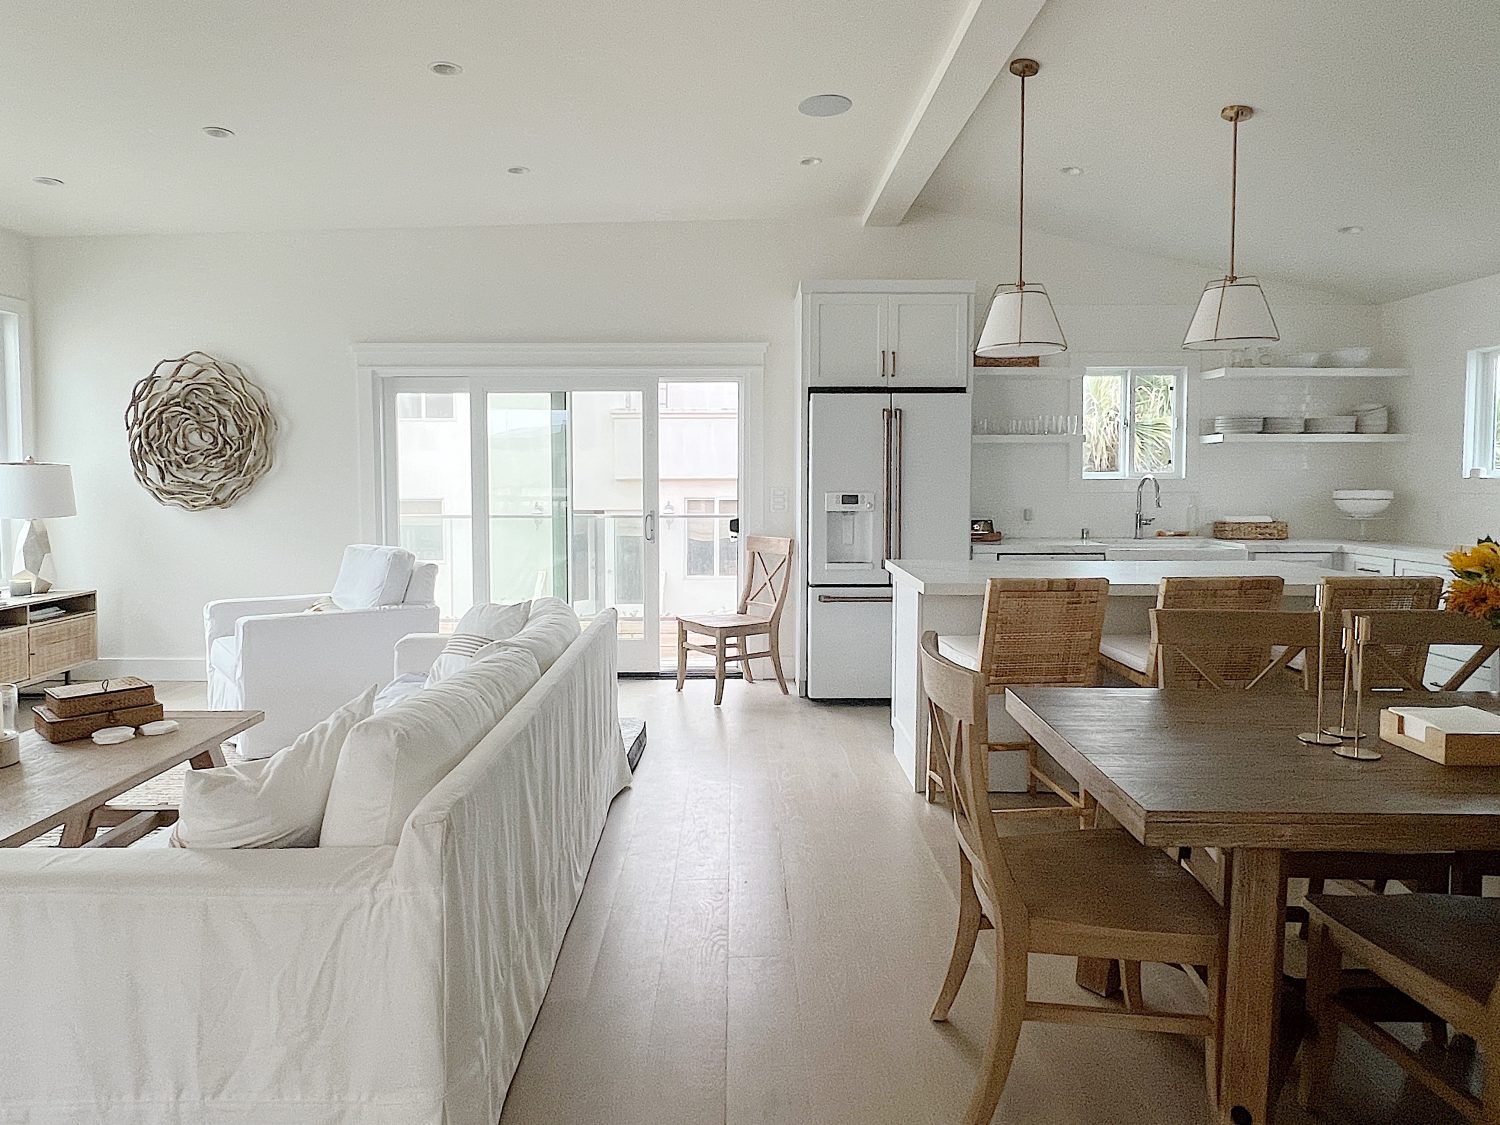 The Beach House family room styled in off-white and tan decor.